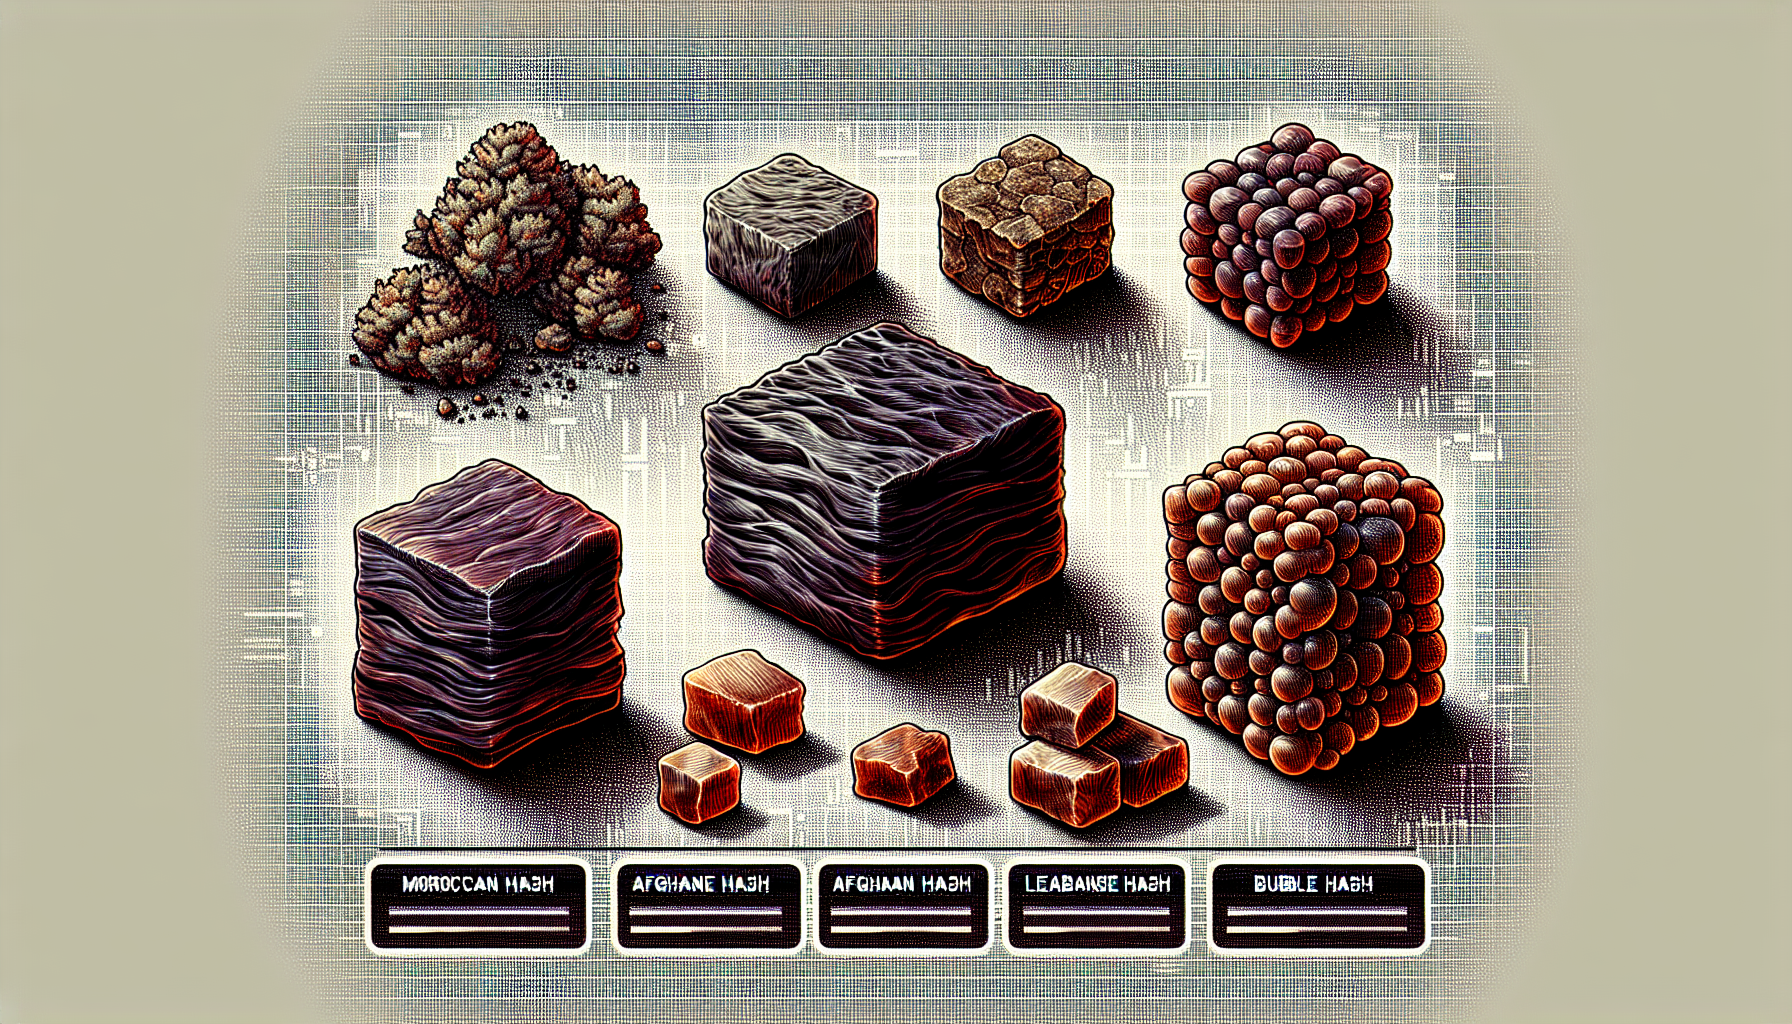 Varieties of hash products